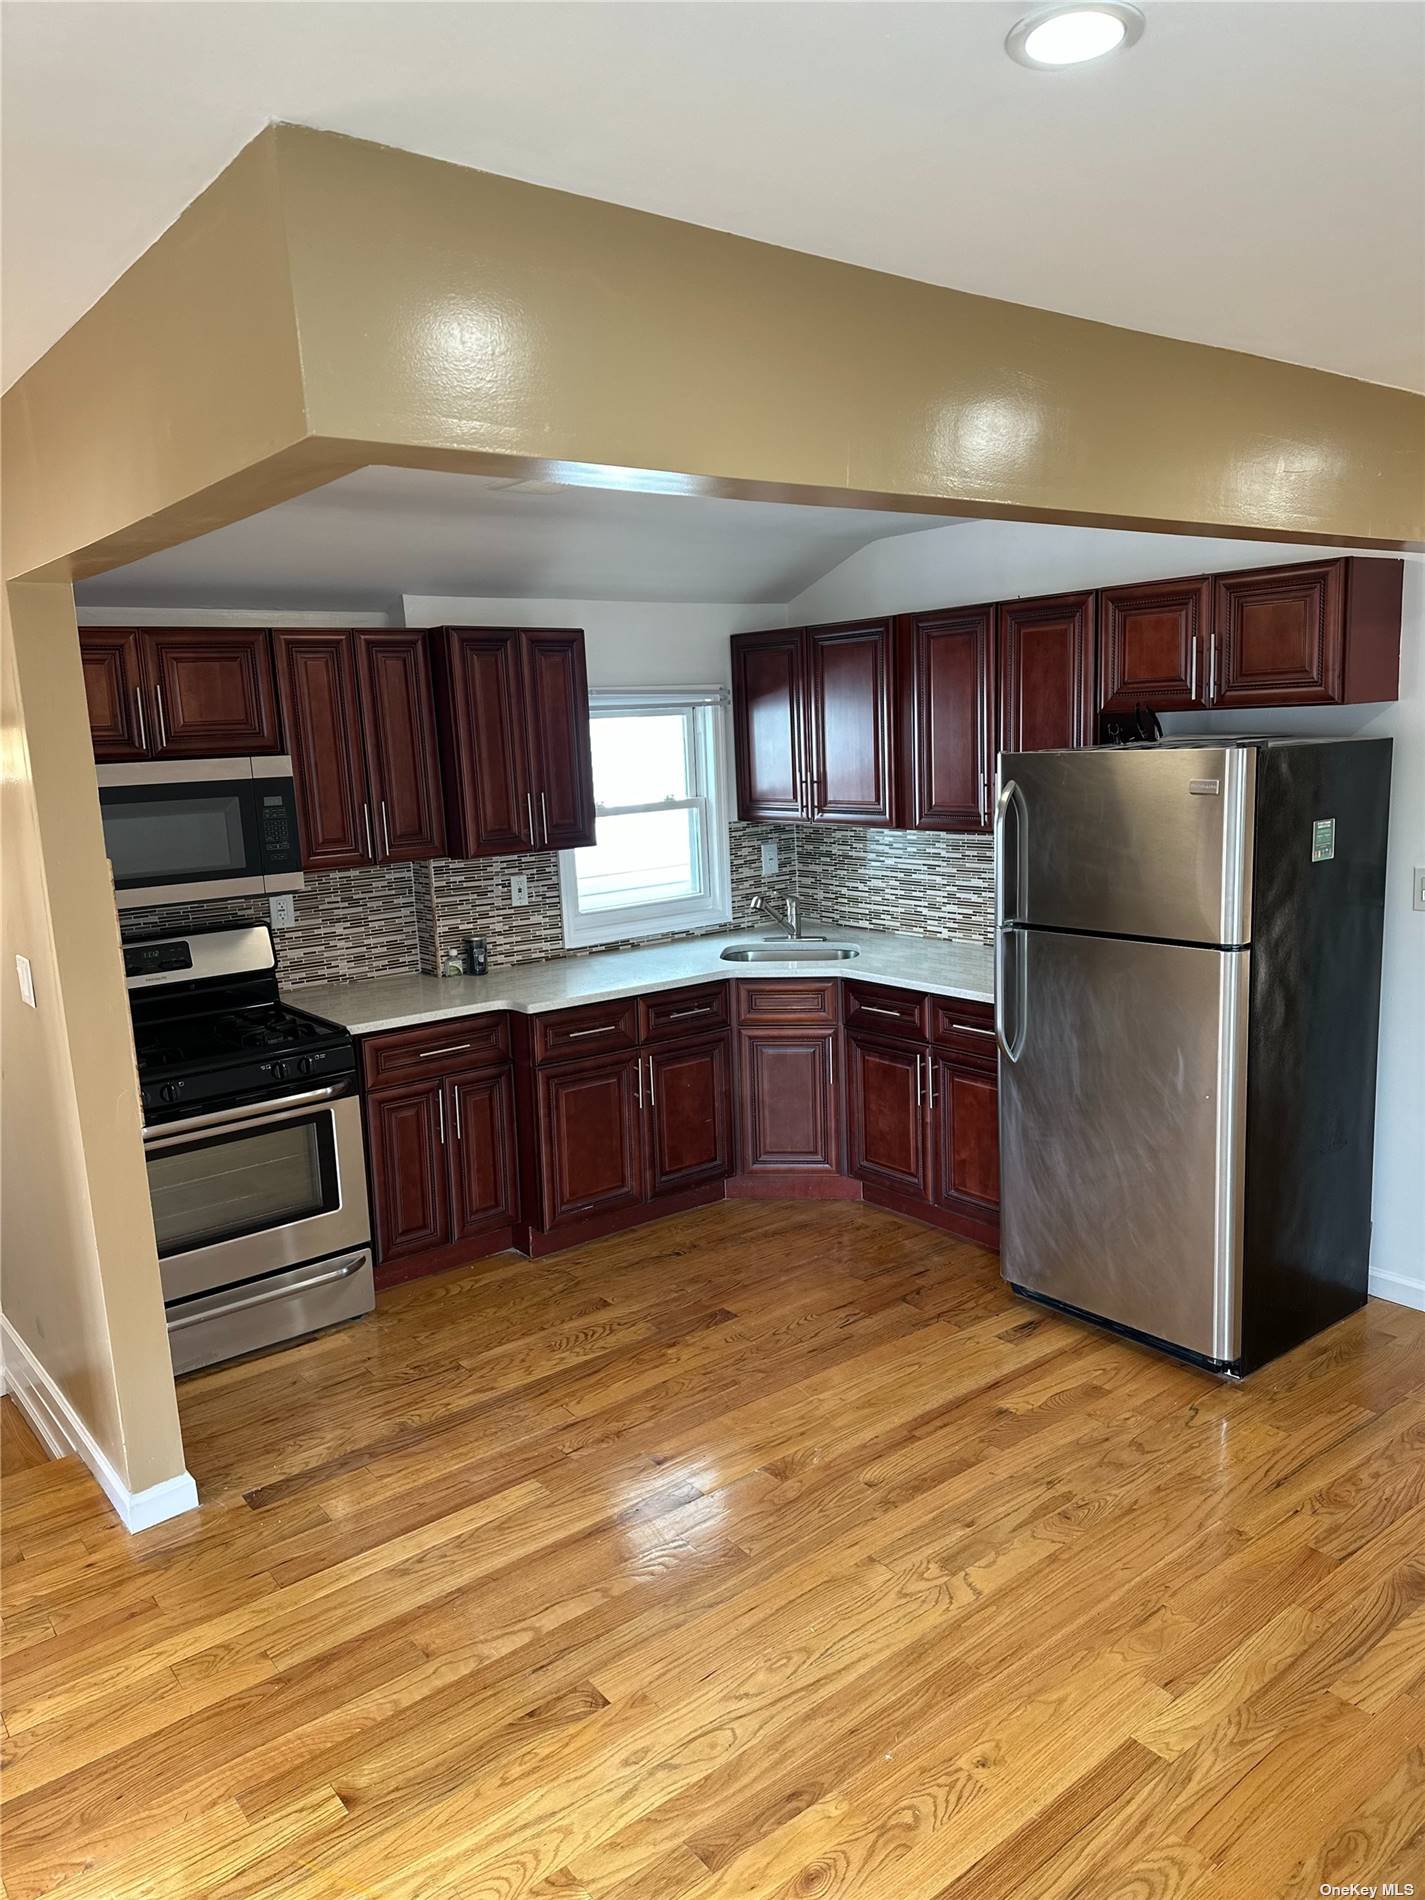 a kitchen with stainless steel appliances kitchen island granite countertop a refrigerator cabinets and wooden floor